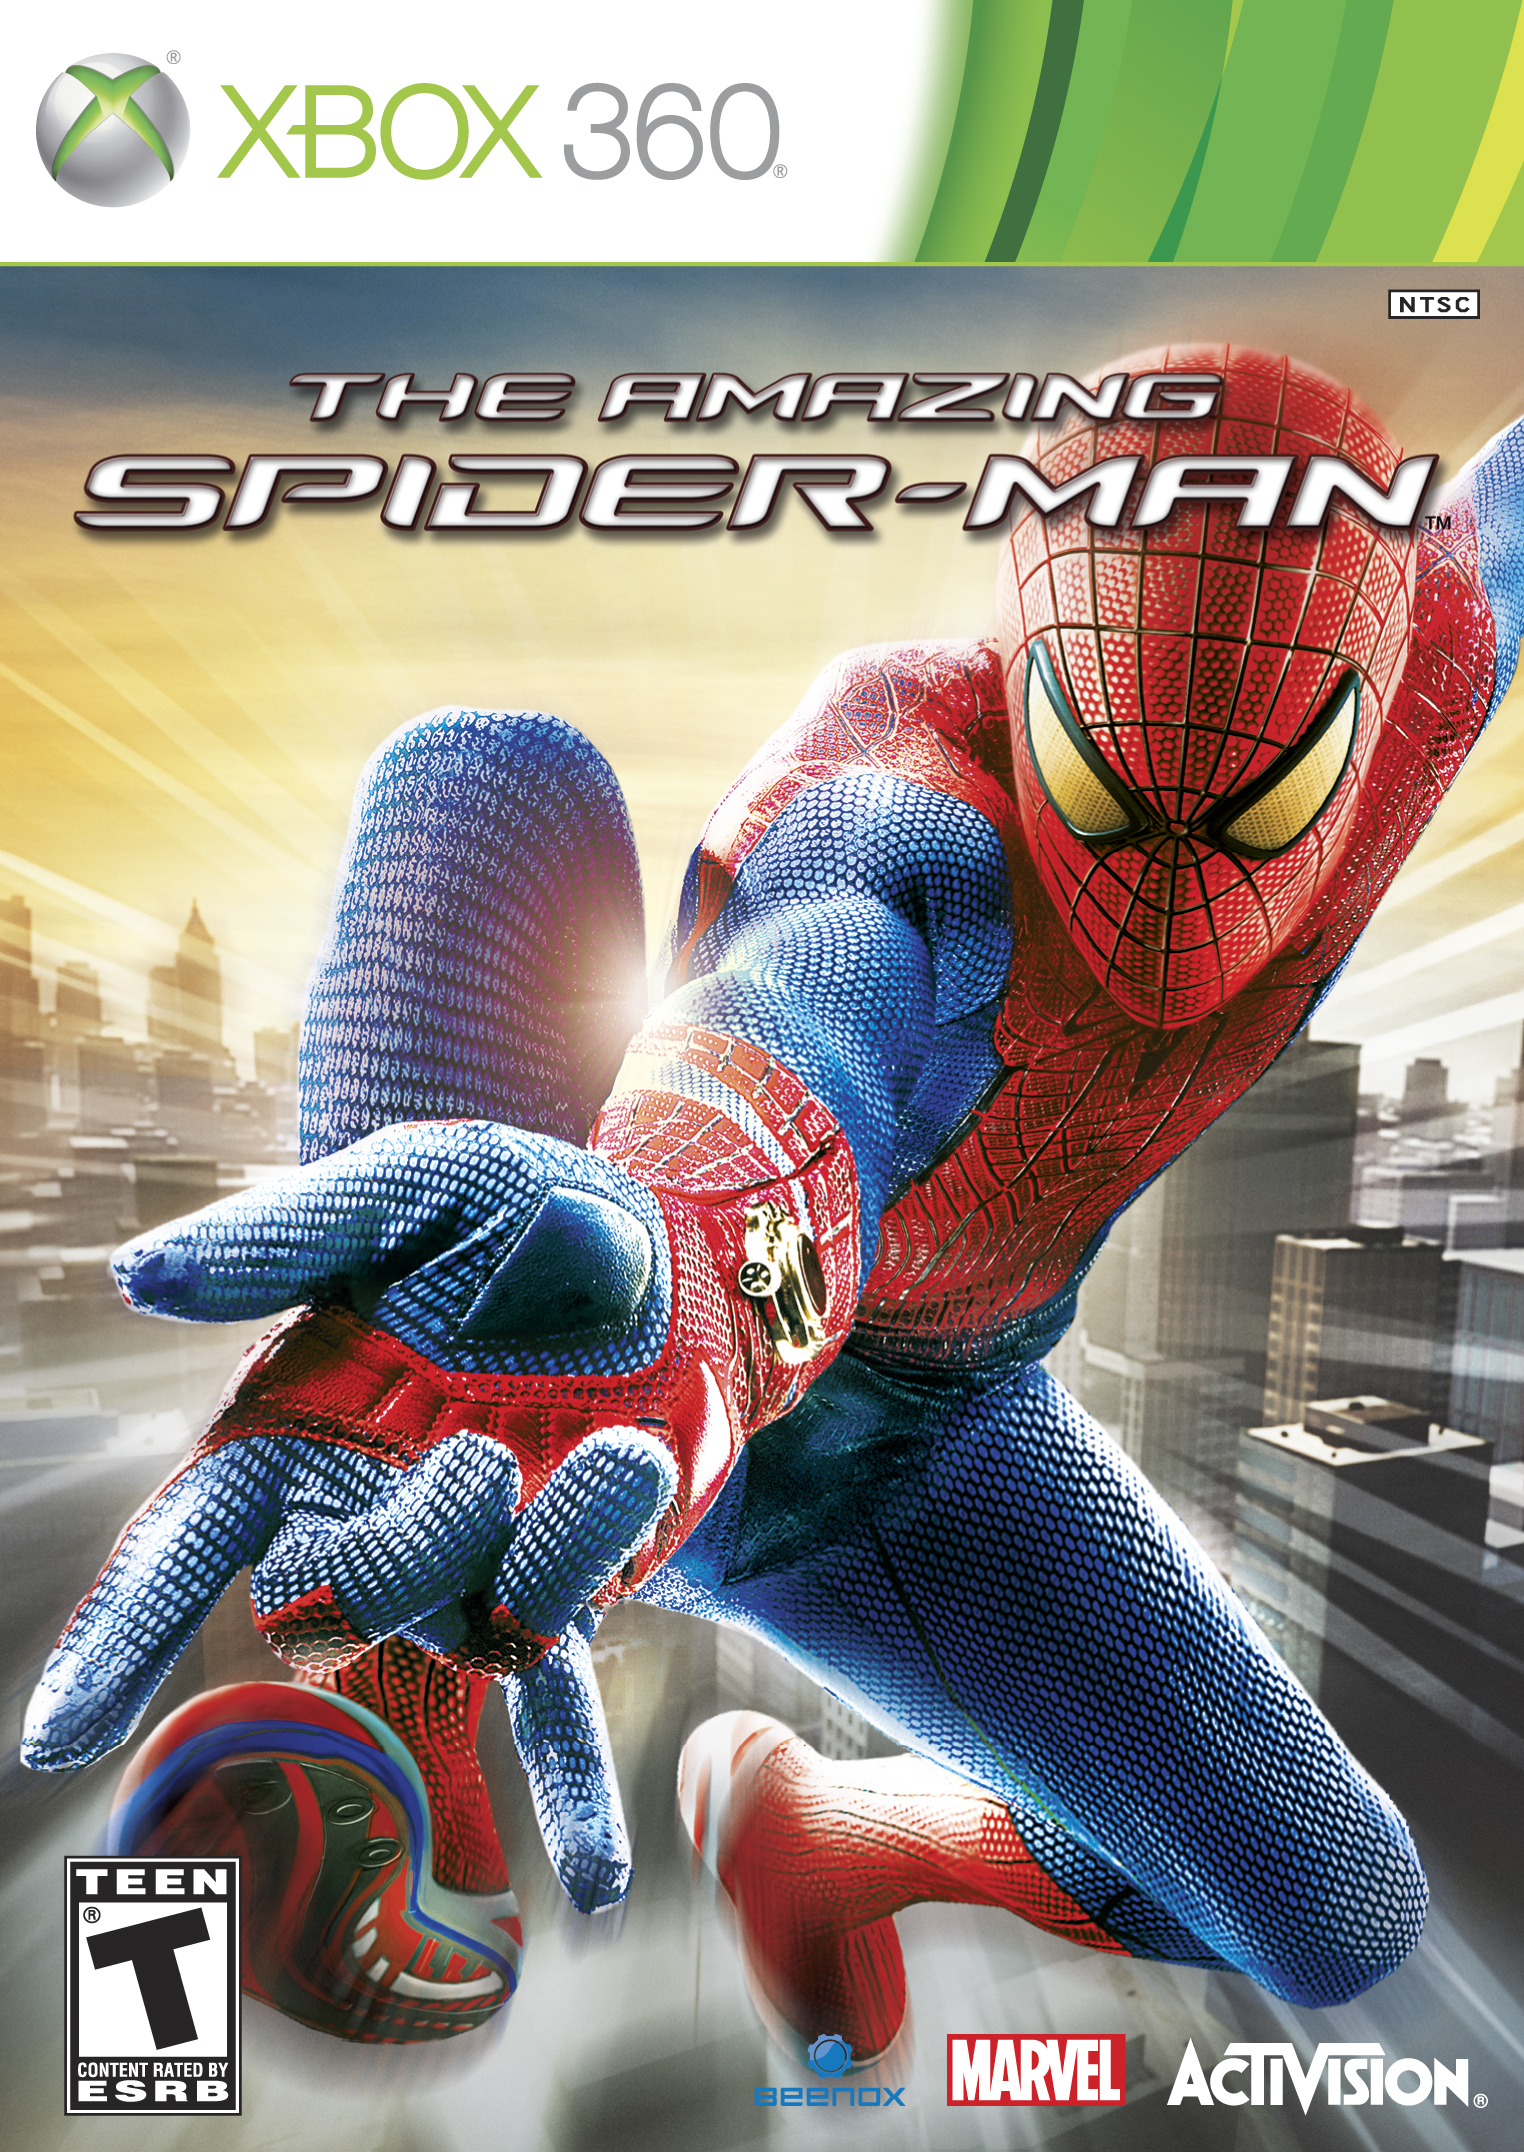 http://njtechreviews.com/wp-content/gallery/the-amazing-spider-man/the-amazing-spider-man-xbox-360.jpg